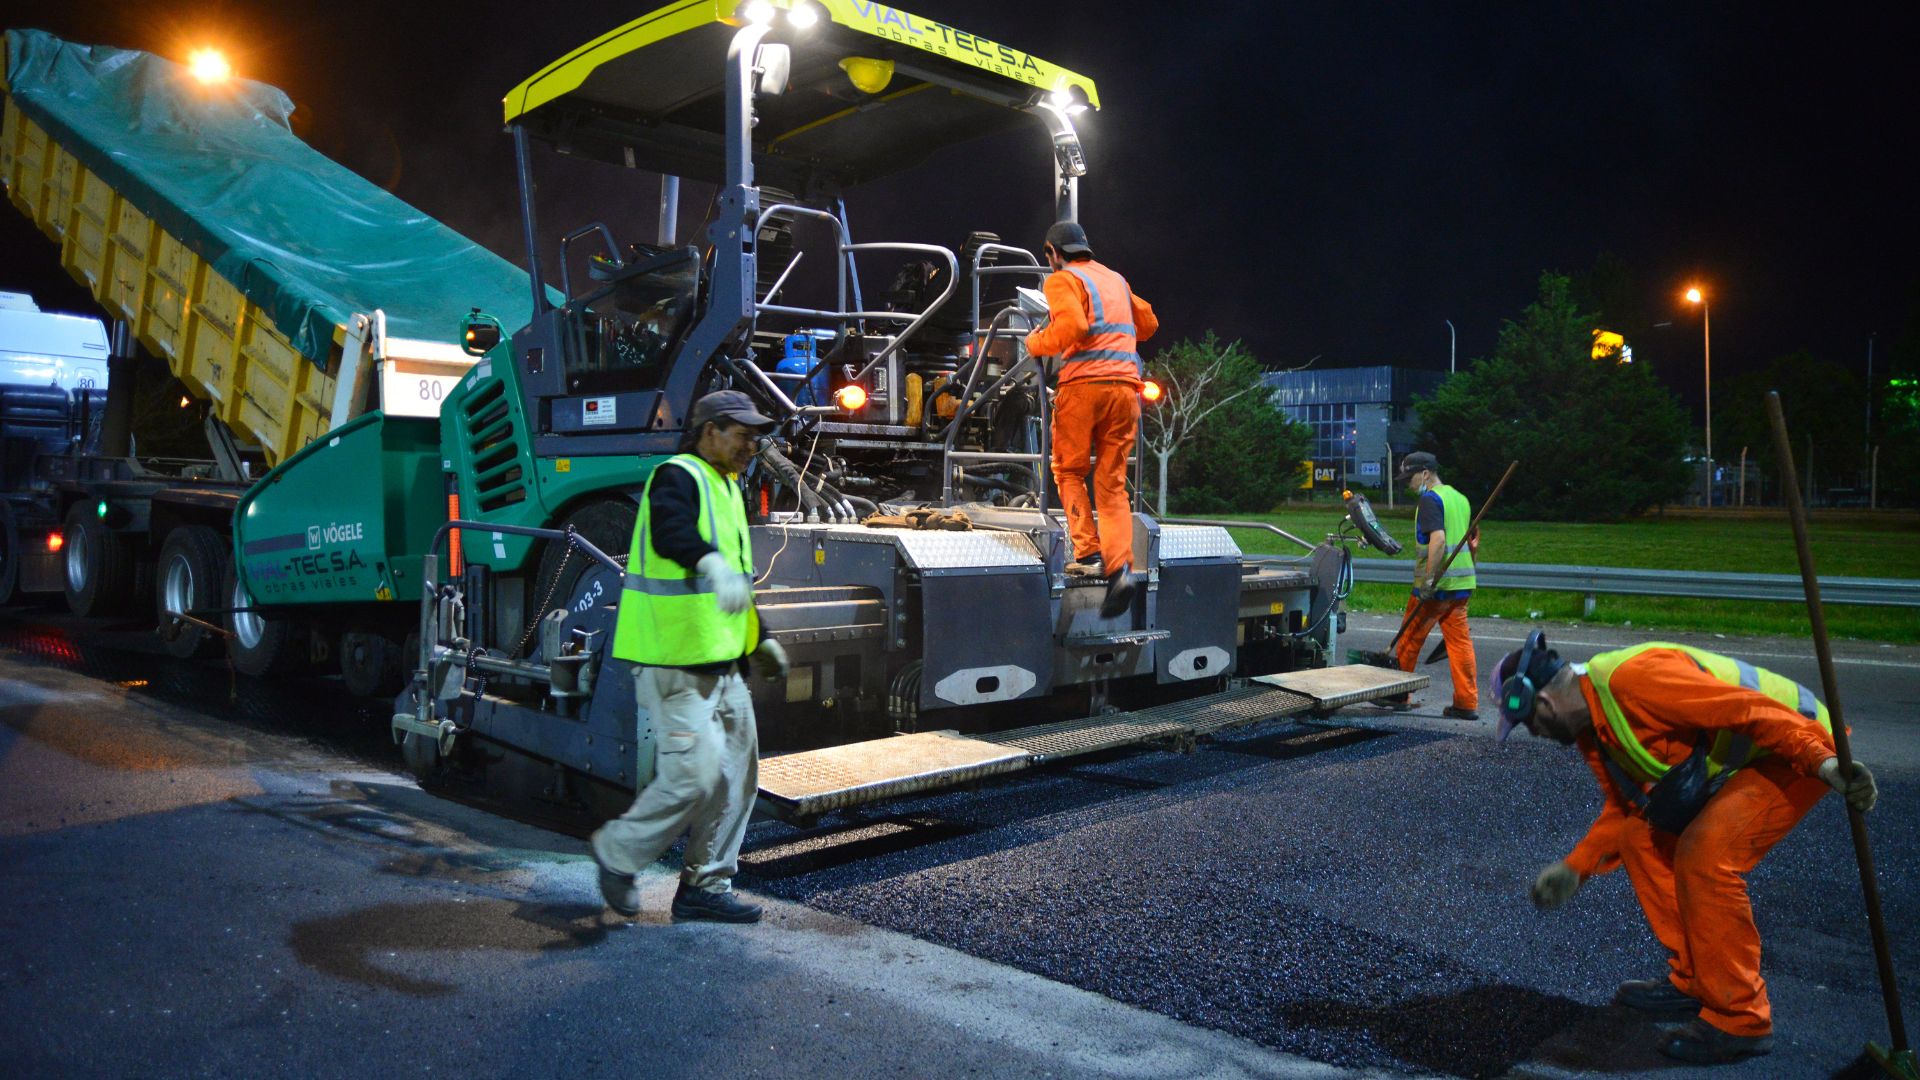 The work takes place at night: Sunday to Friday, from 10 p.m. to 5 a.m. (Credit: Autopistas del Sol Press)